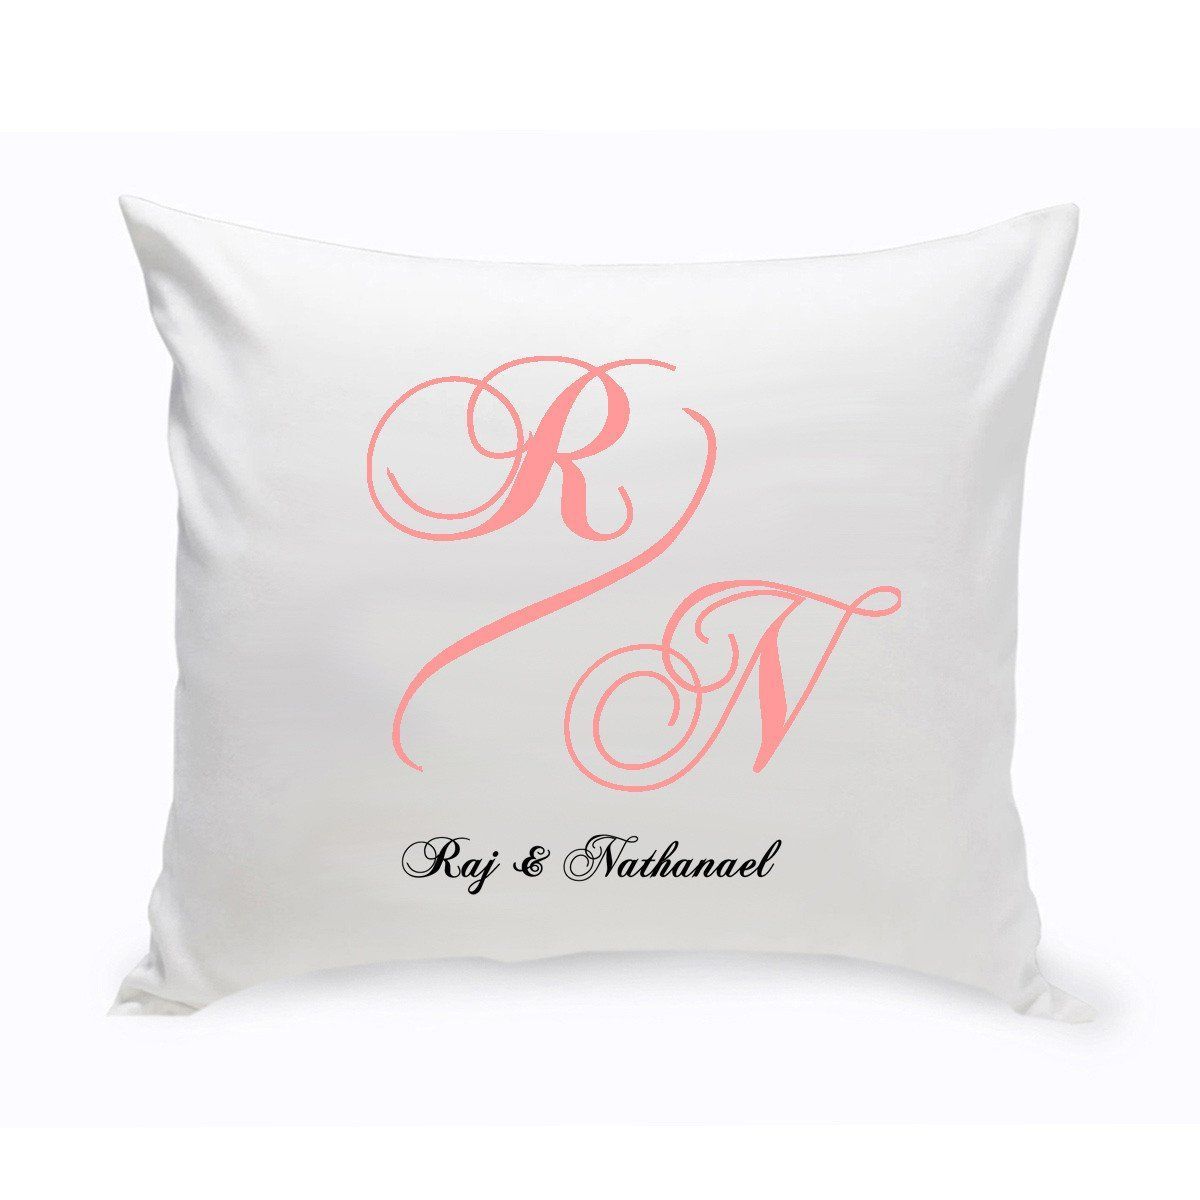 Personalized Monogrammed Throw Pillows -  Couples Unity Monogrammed